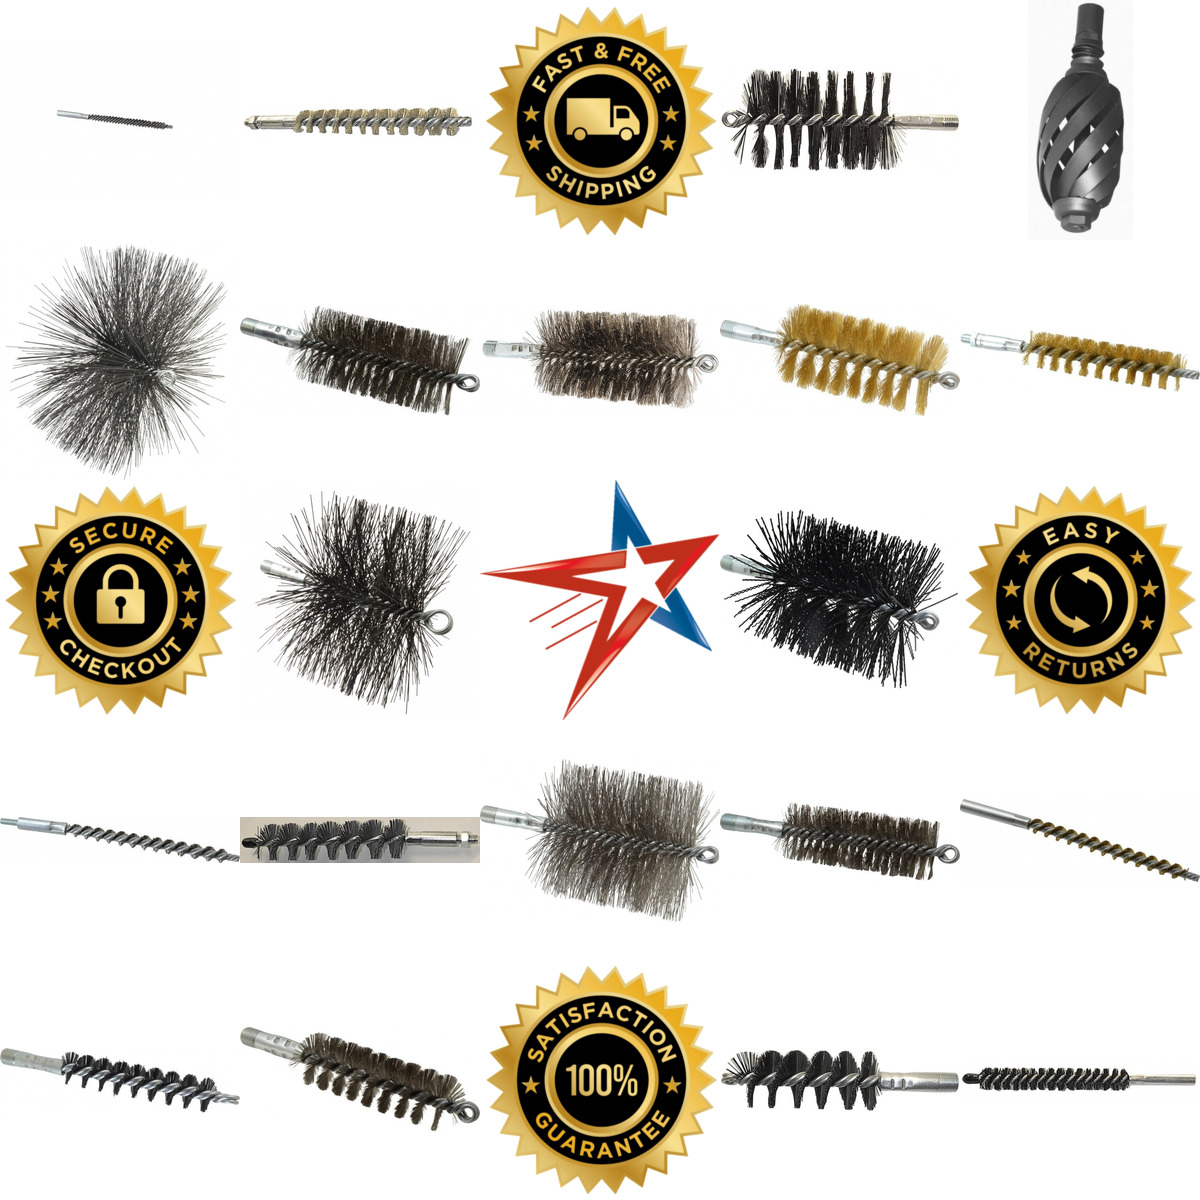 A selection of Internal Tube Brushes and Scrapers products on GoVets